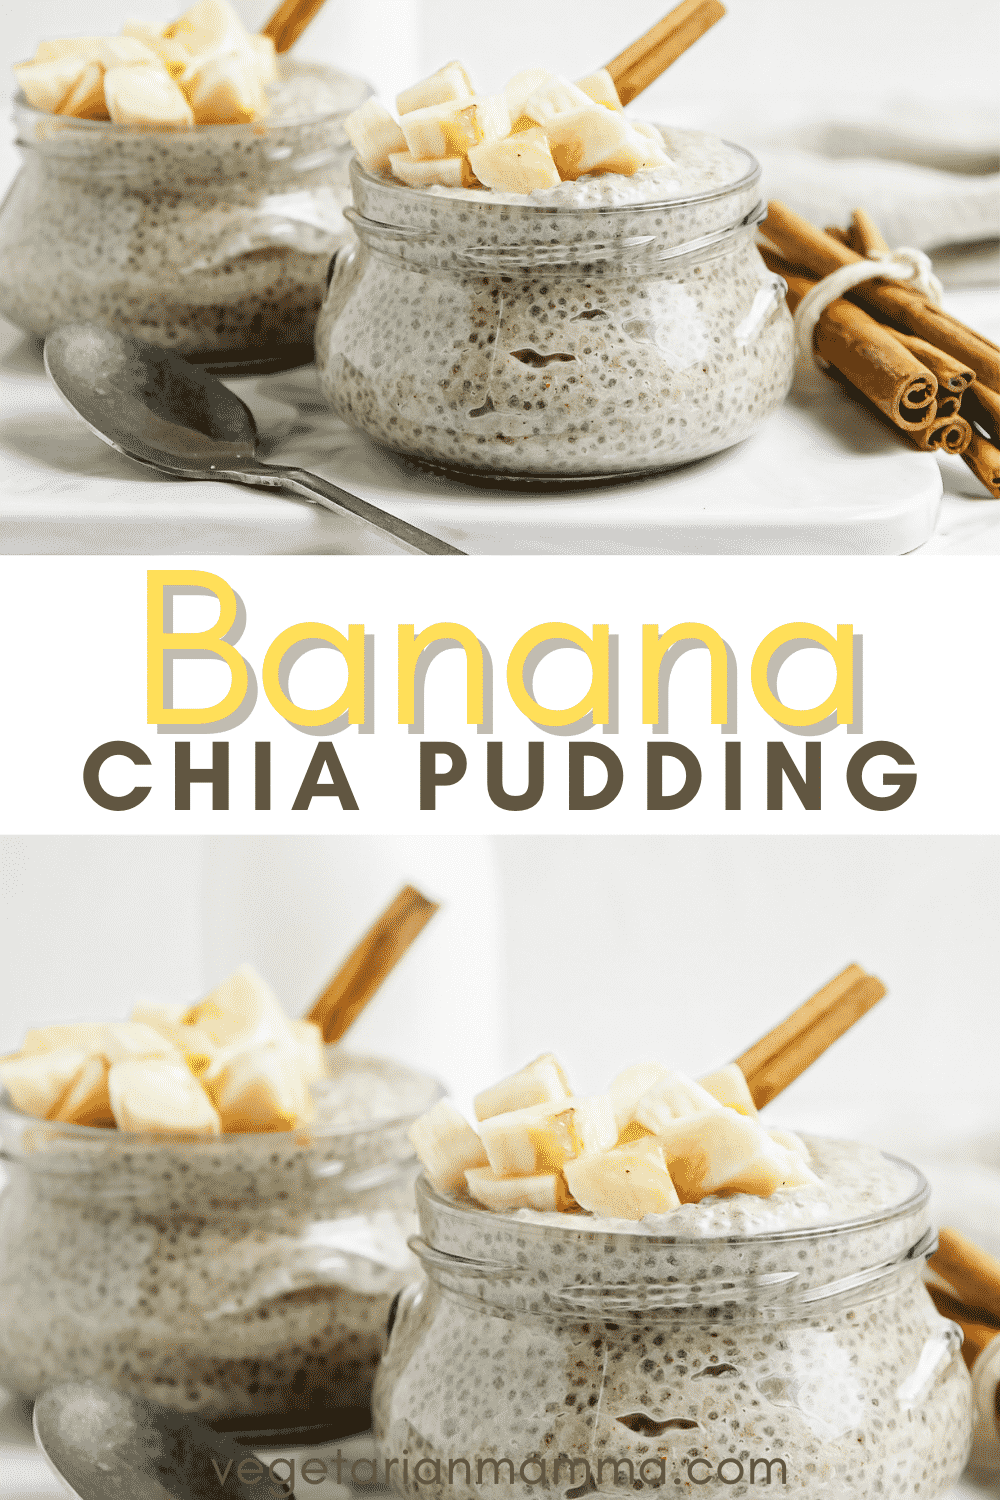 Banana Chia Pudding is the healthiest meal prep breakfast ever! Banana pudding lovers will rave over this creamy vegan pudding with chia seeds, mashed bananas, and coconut milk.